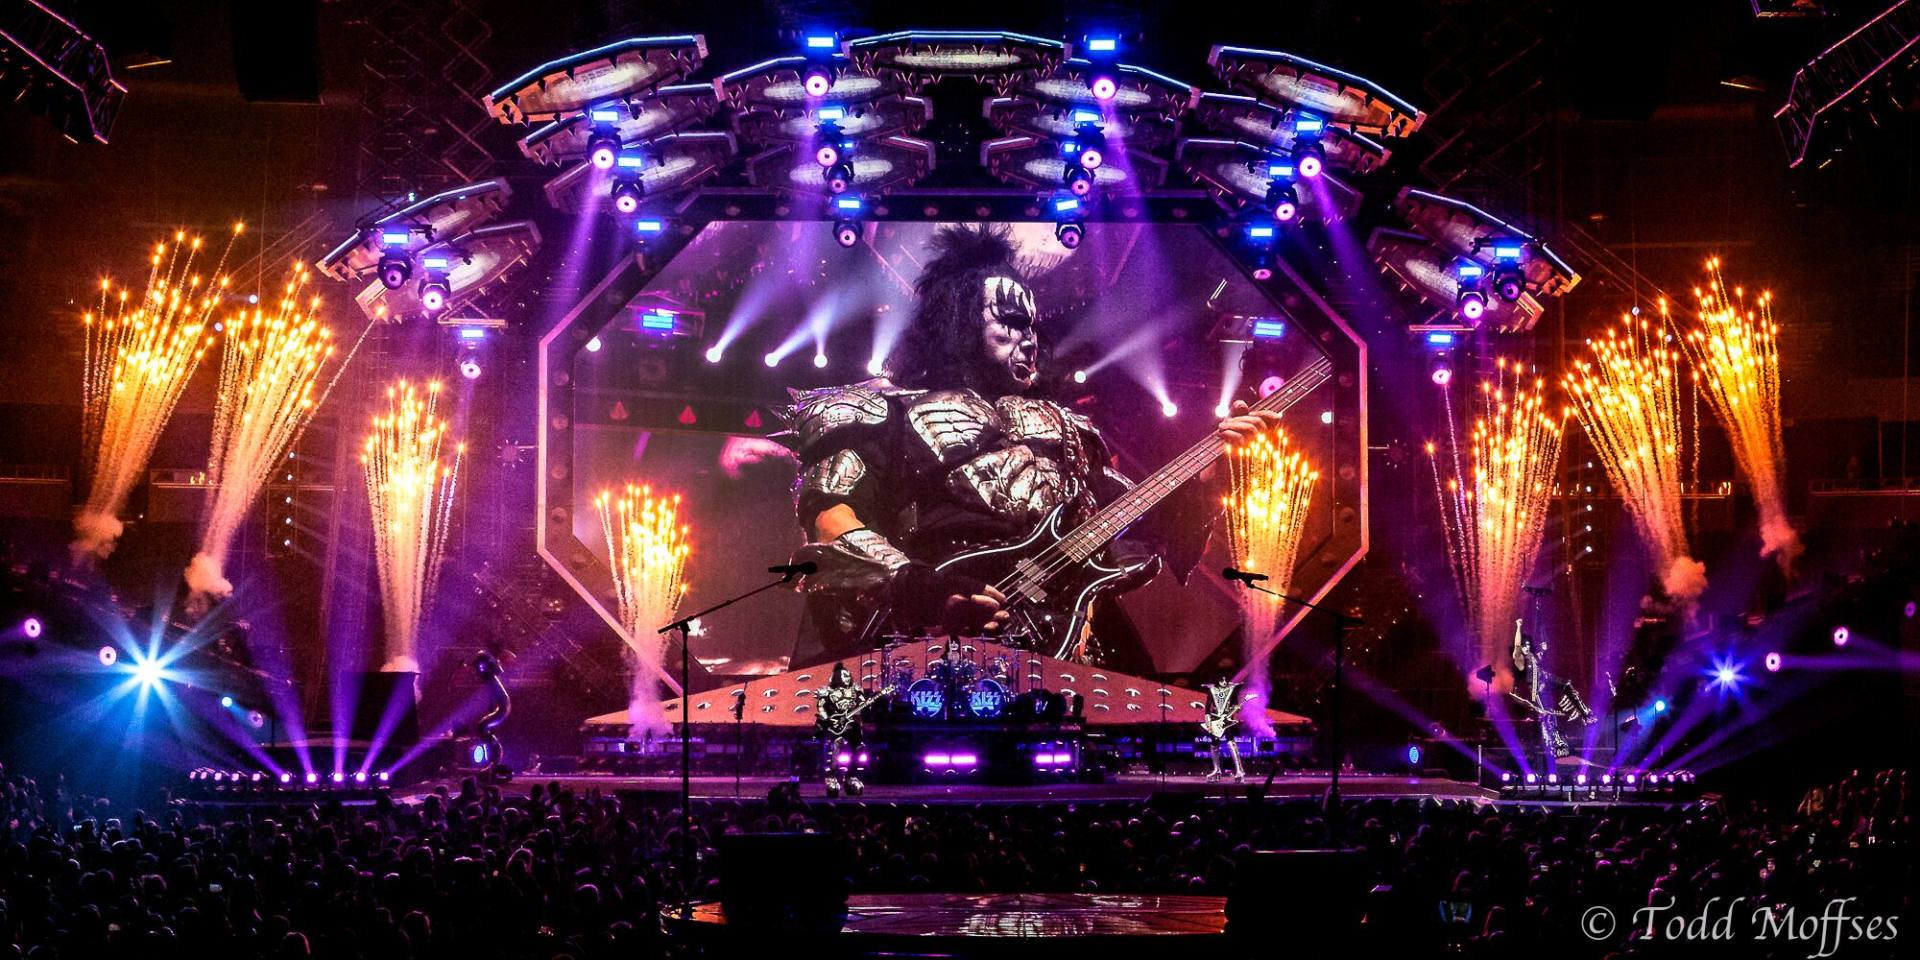 KISS Final World Tour 'End of the Road' Will Showcase Dynamic Lighting